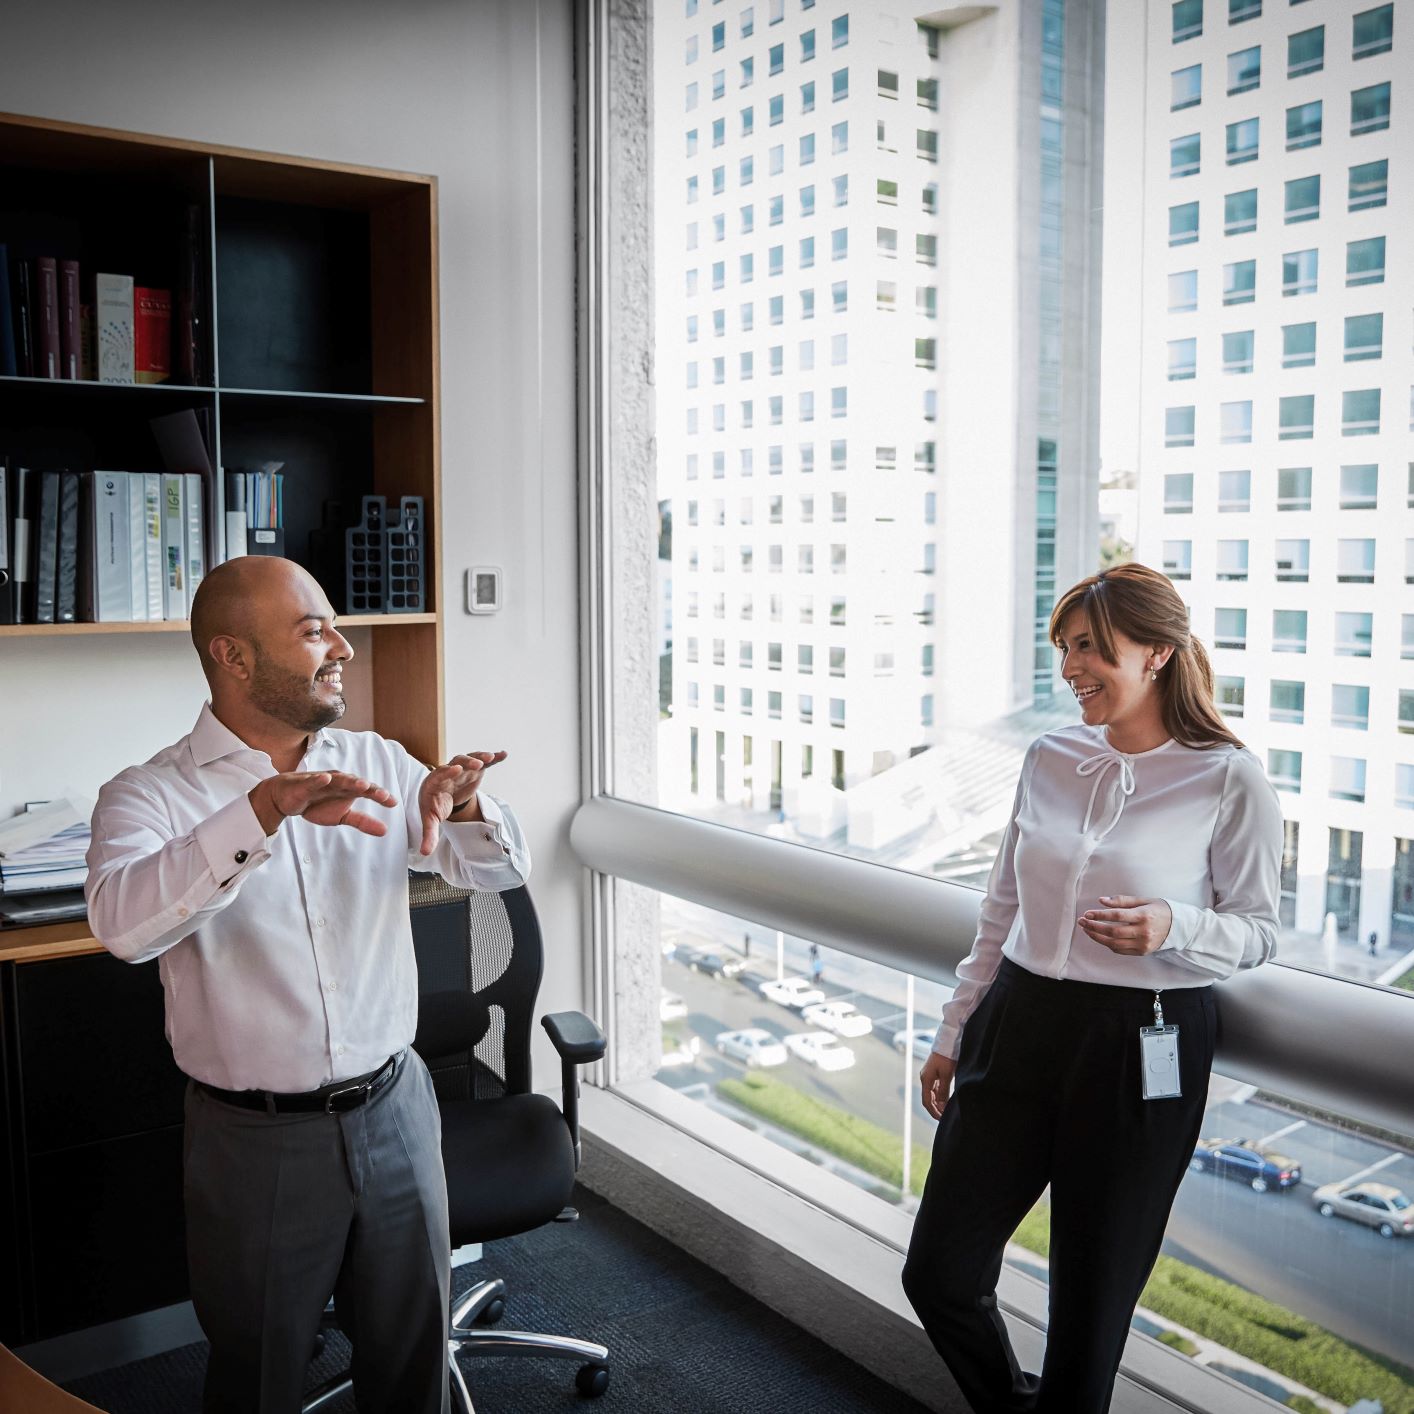 The picture shows two BMW marketing employees talking in an office.